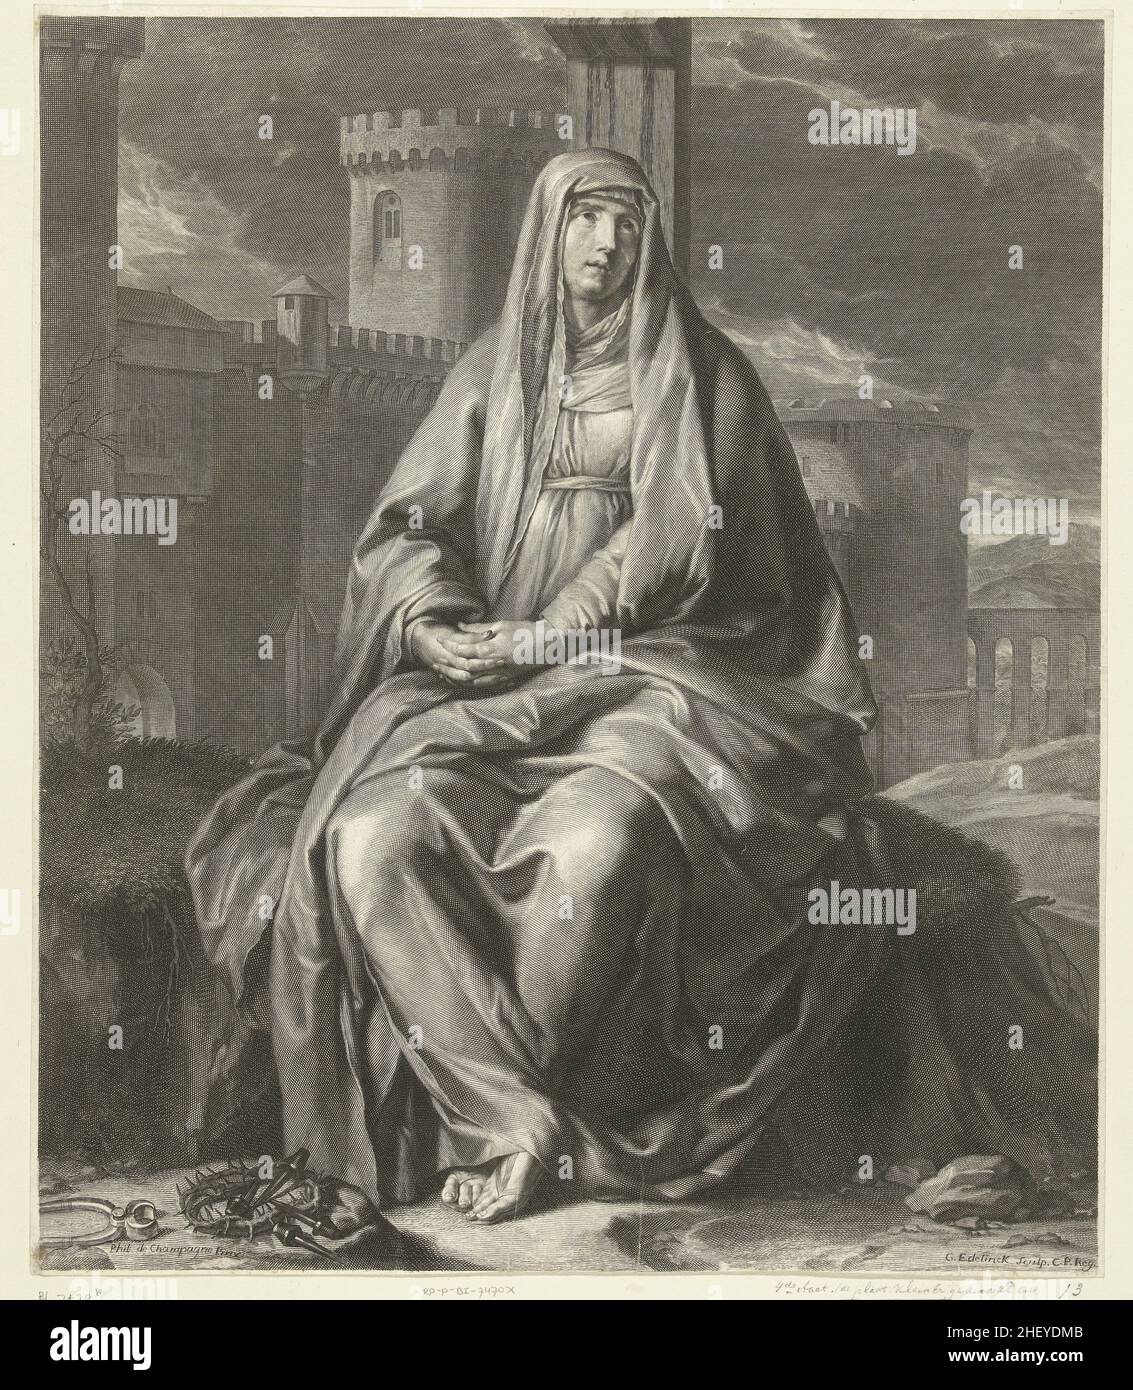 Mourning Mary, Gerard Edelinck, after Philippe de Champaigne, 1666 - 1707 Stock Photo